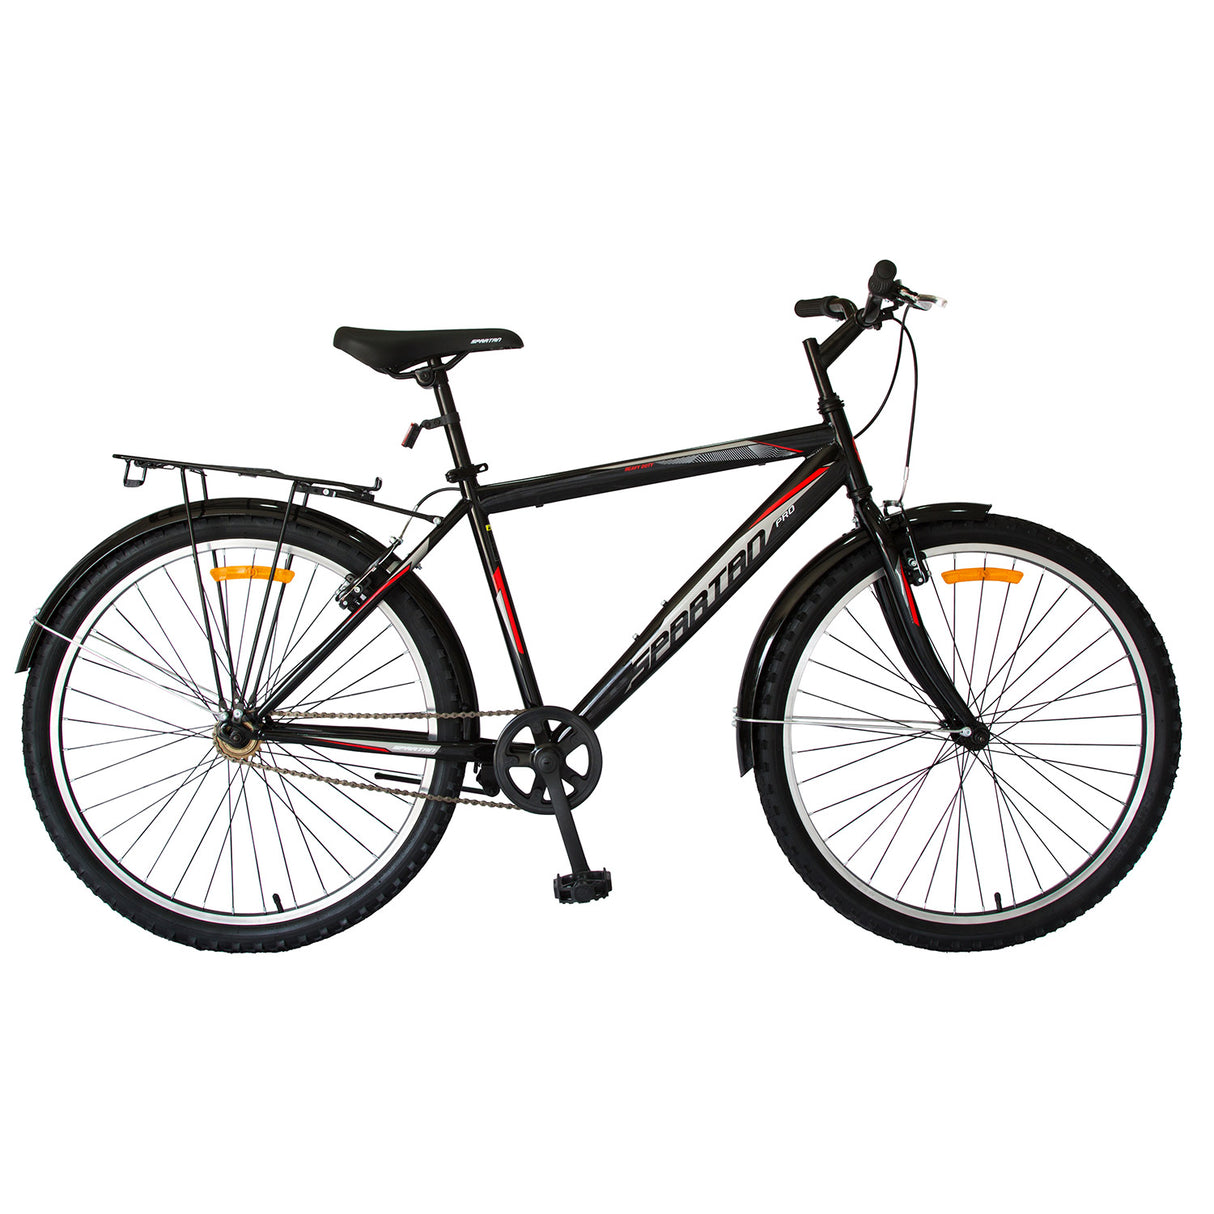 Spartan 26" Commuter Bicycle